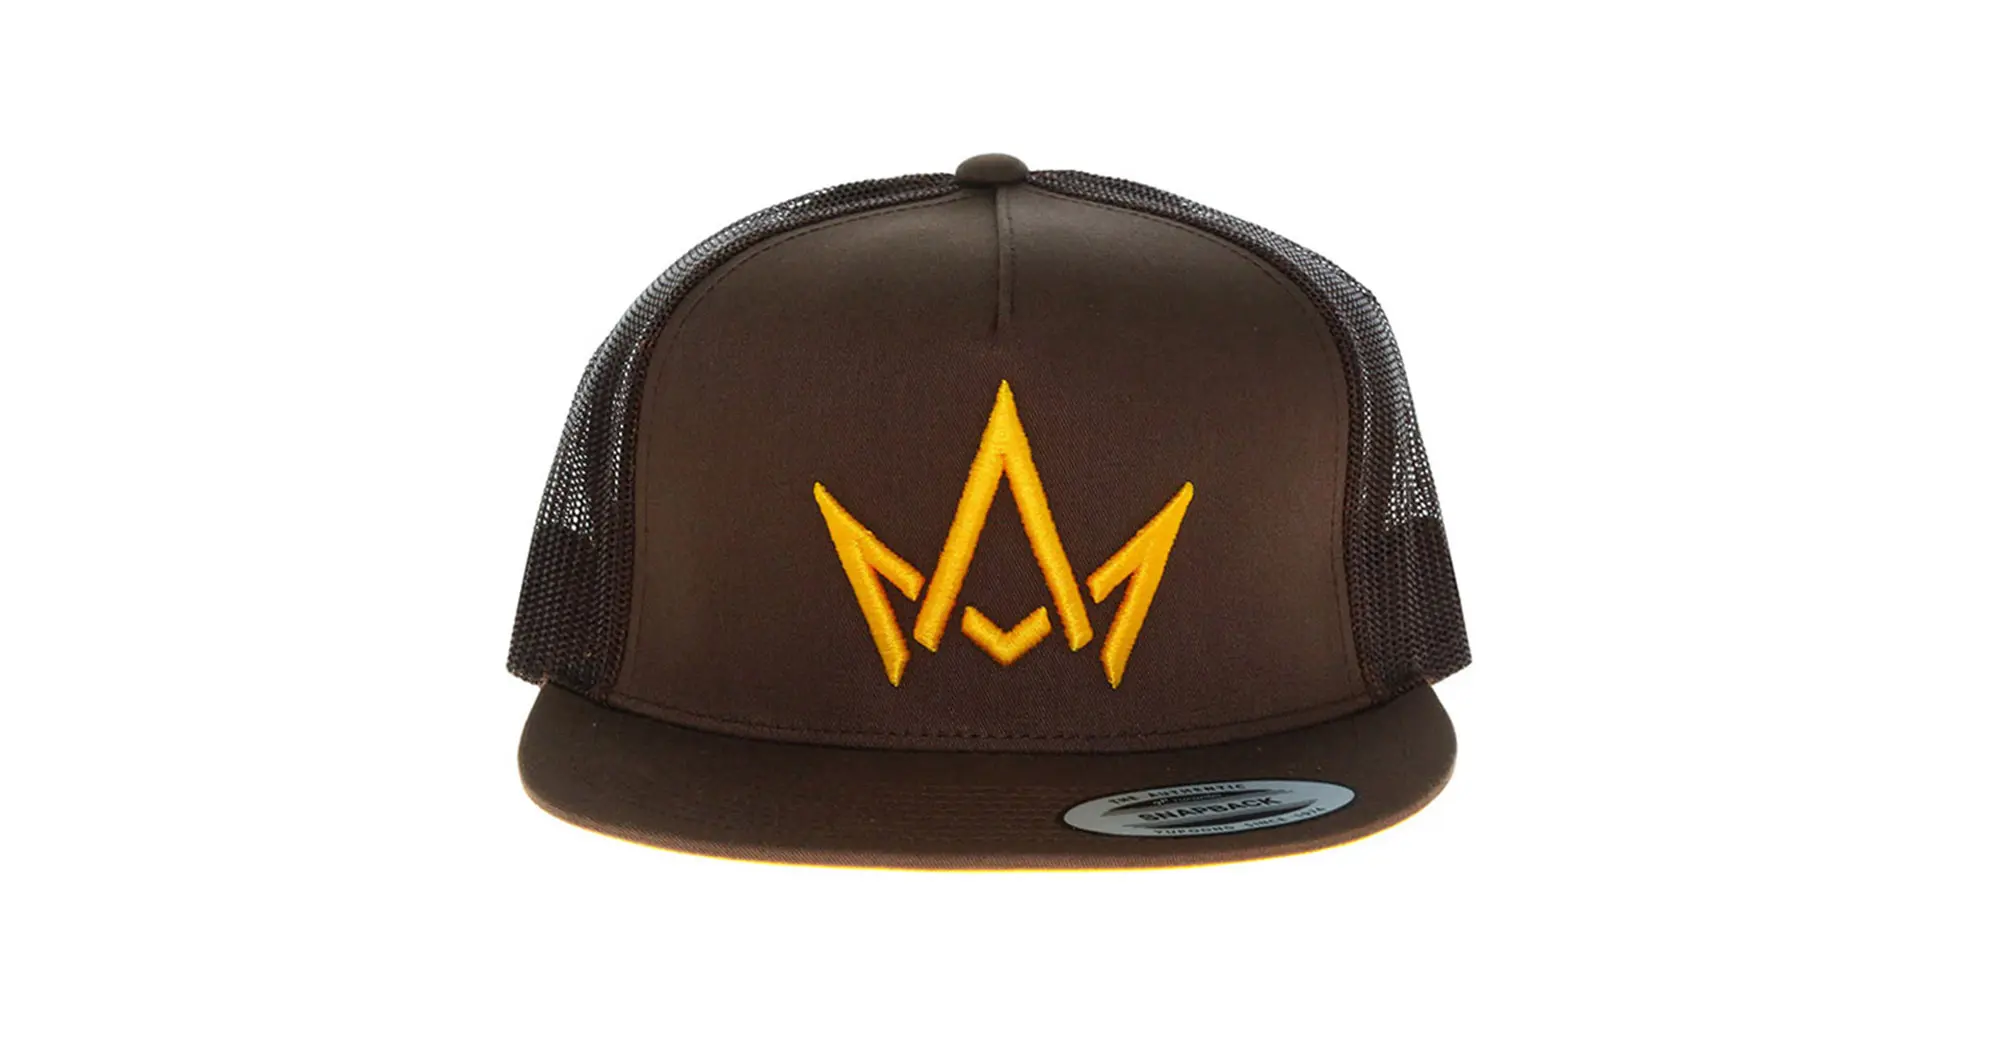 Brown Hat With Gold Crown Logo